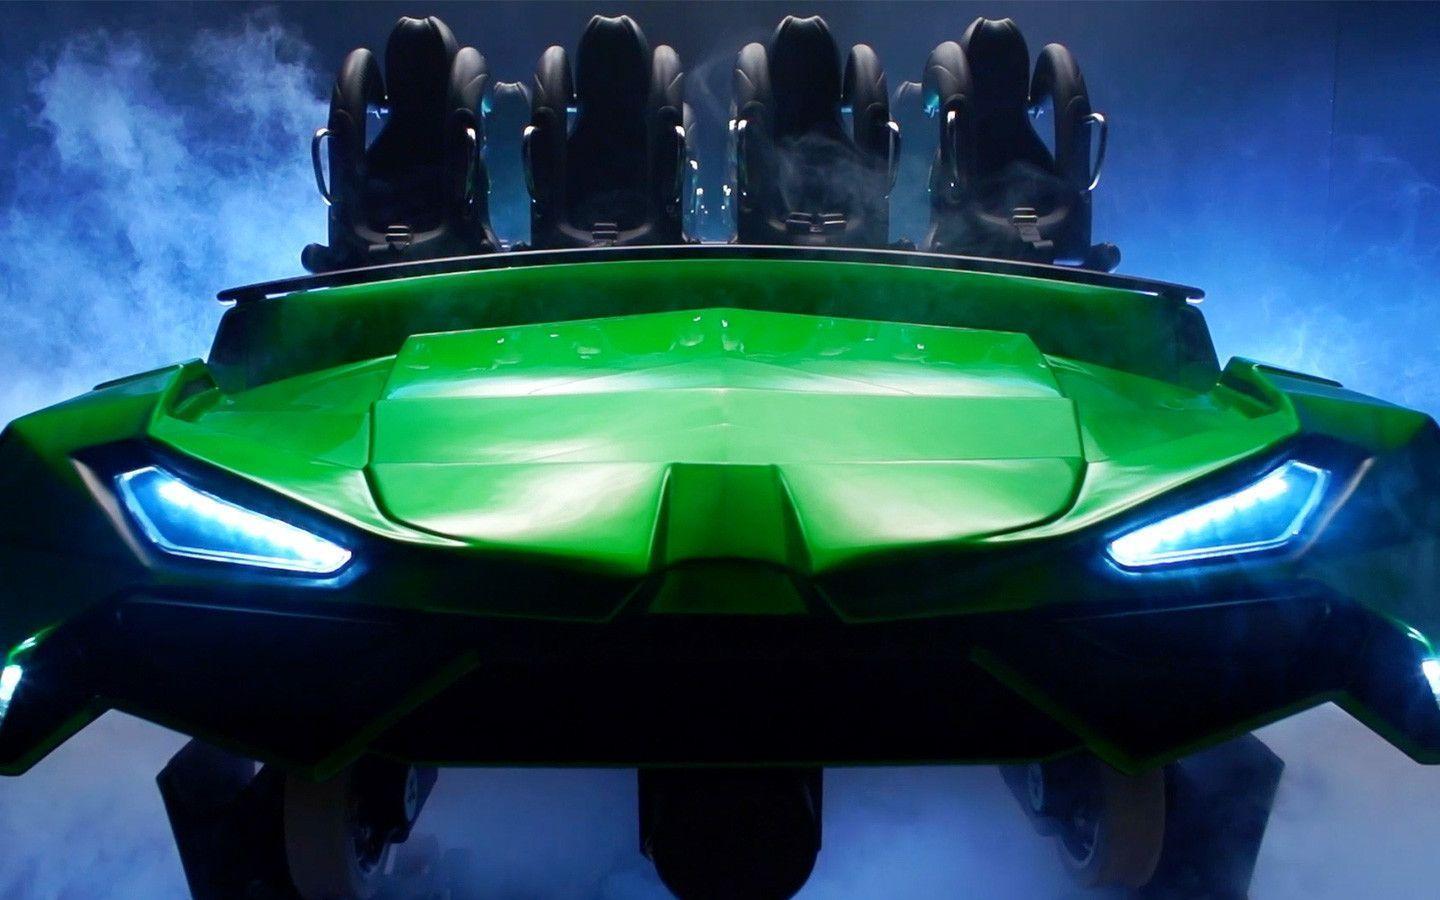 New Details On Incredible Hulk Coaster Relaunch!